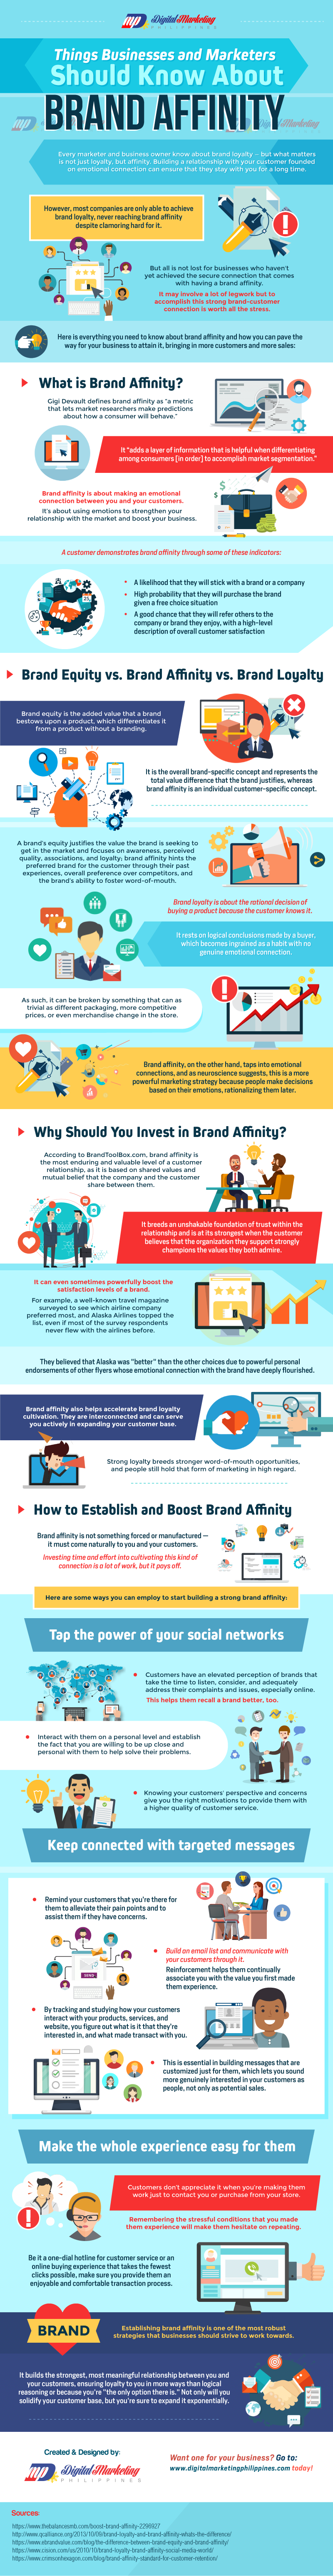 things businesses and marketers should know about brand affinity